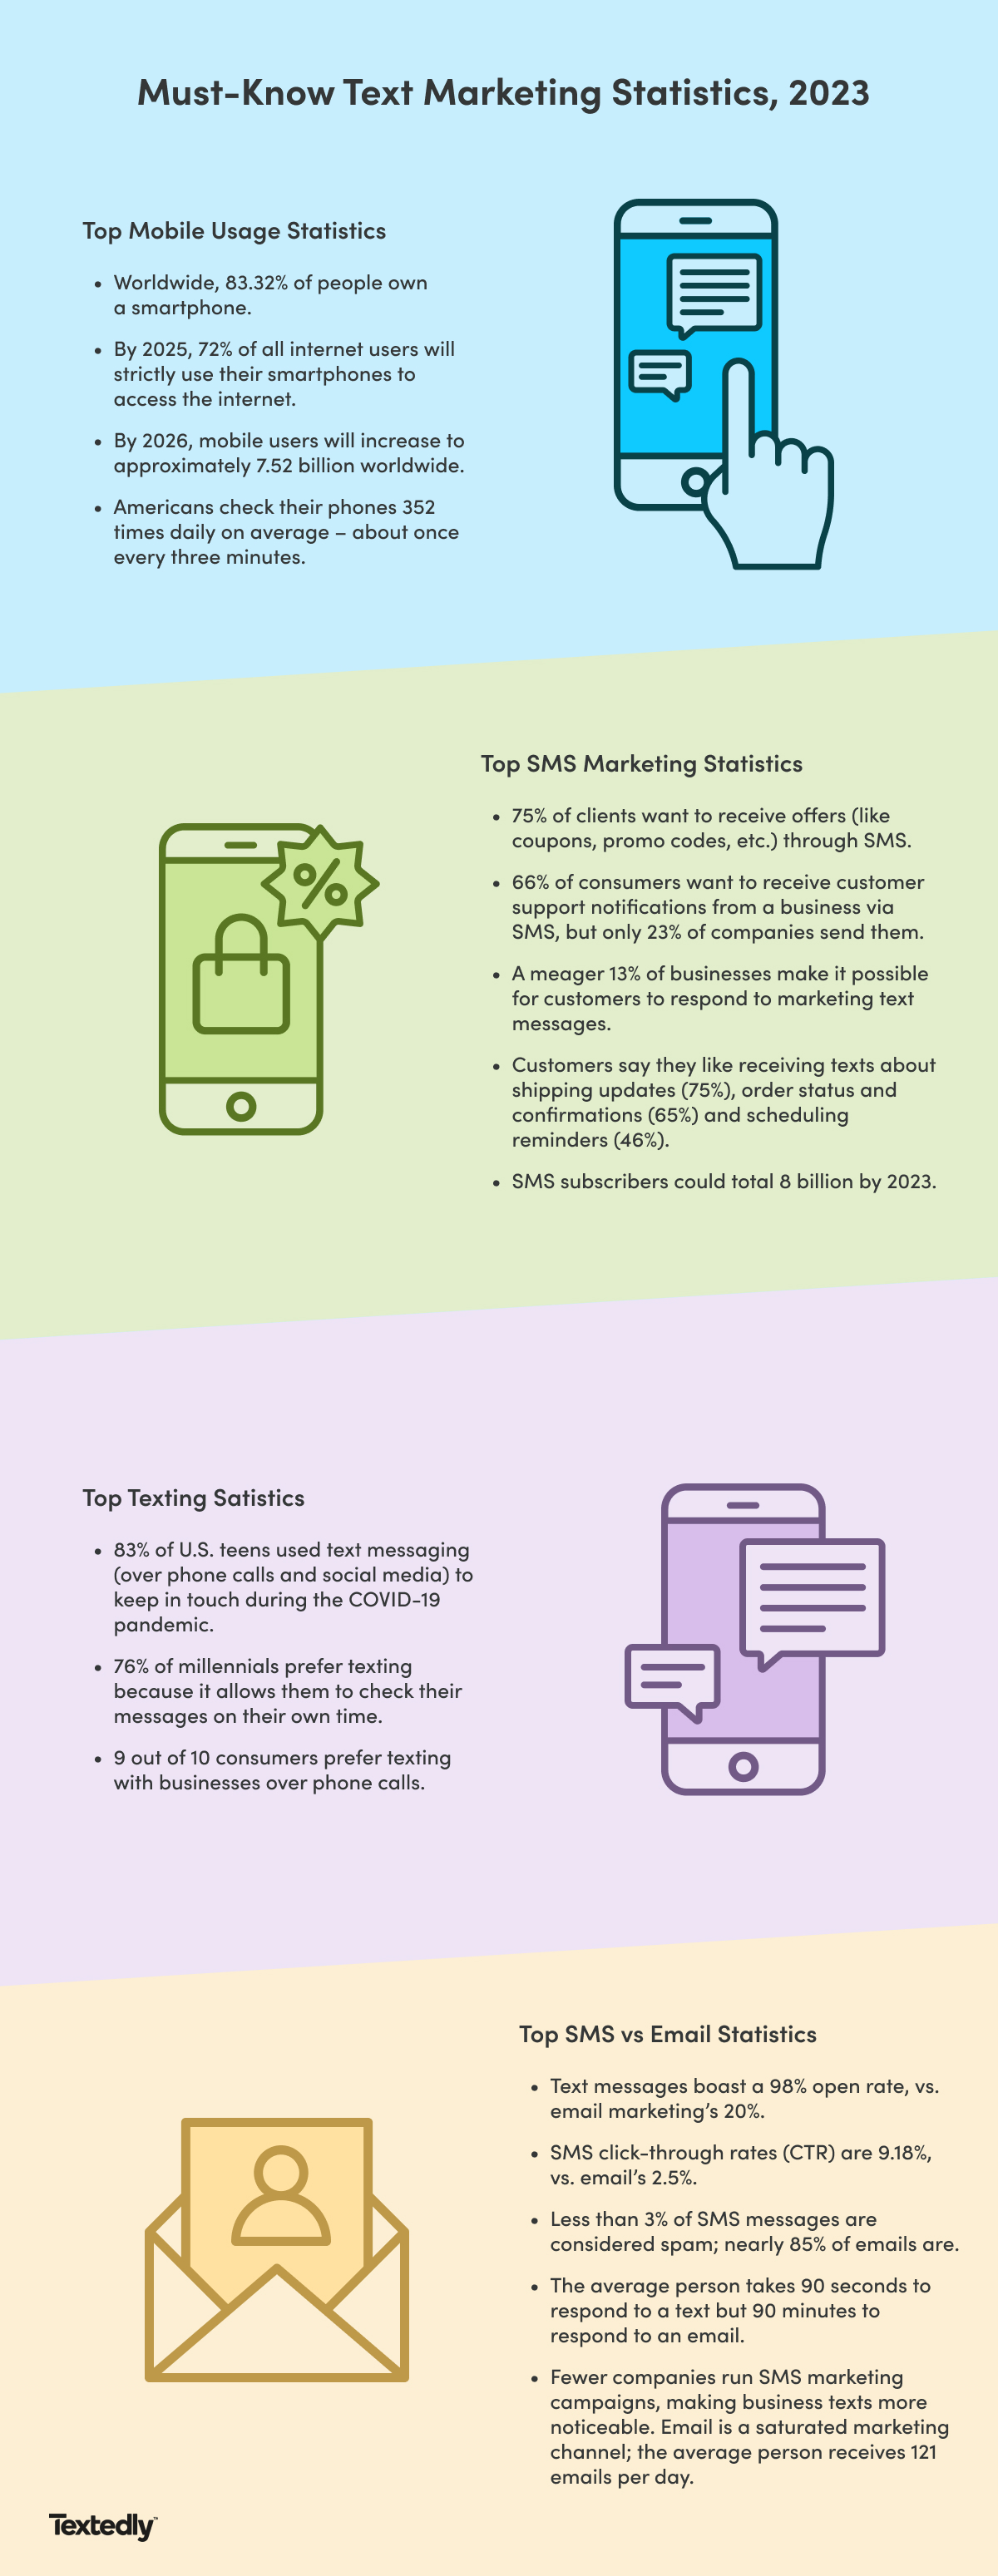 infographic featuring facts about texting including mobile usage statistics, SMS marketing statistics, and SMS vs email statistics